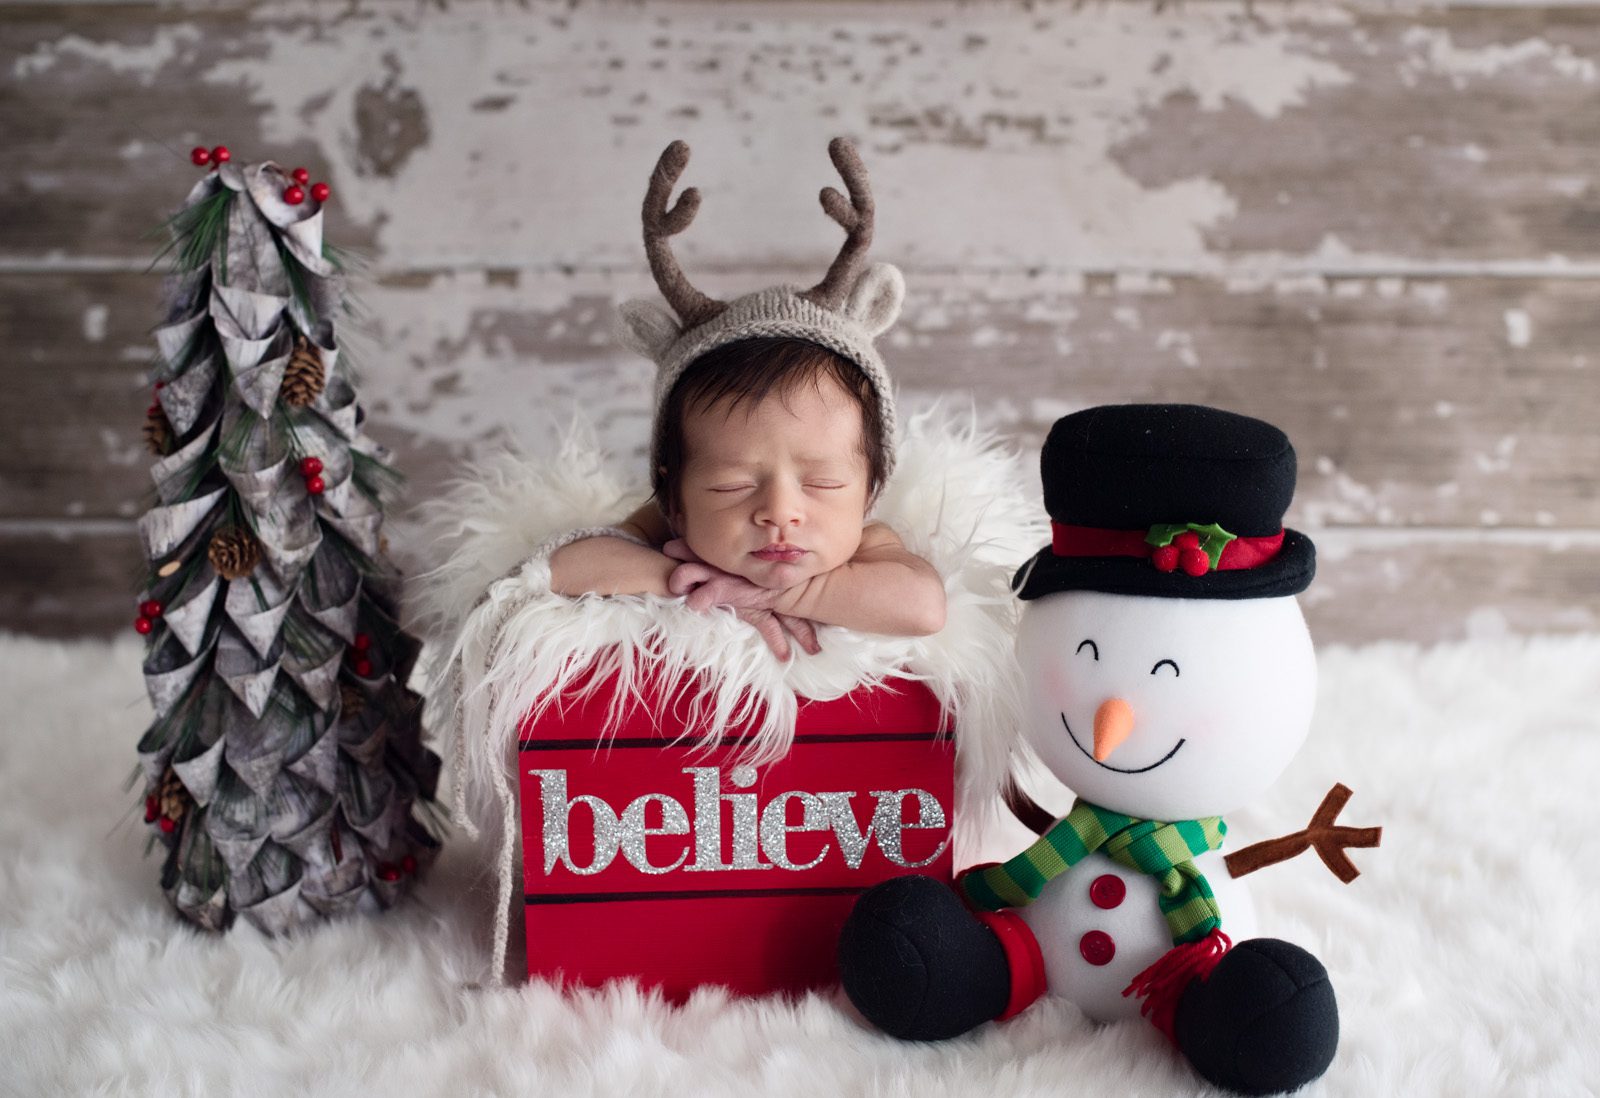 Newborn baby in a winter setting with a reindeer hat and in a wood crate that reads believe